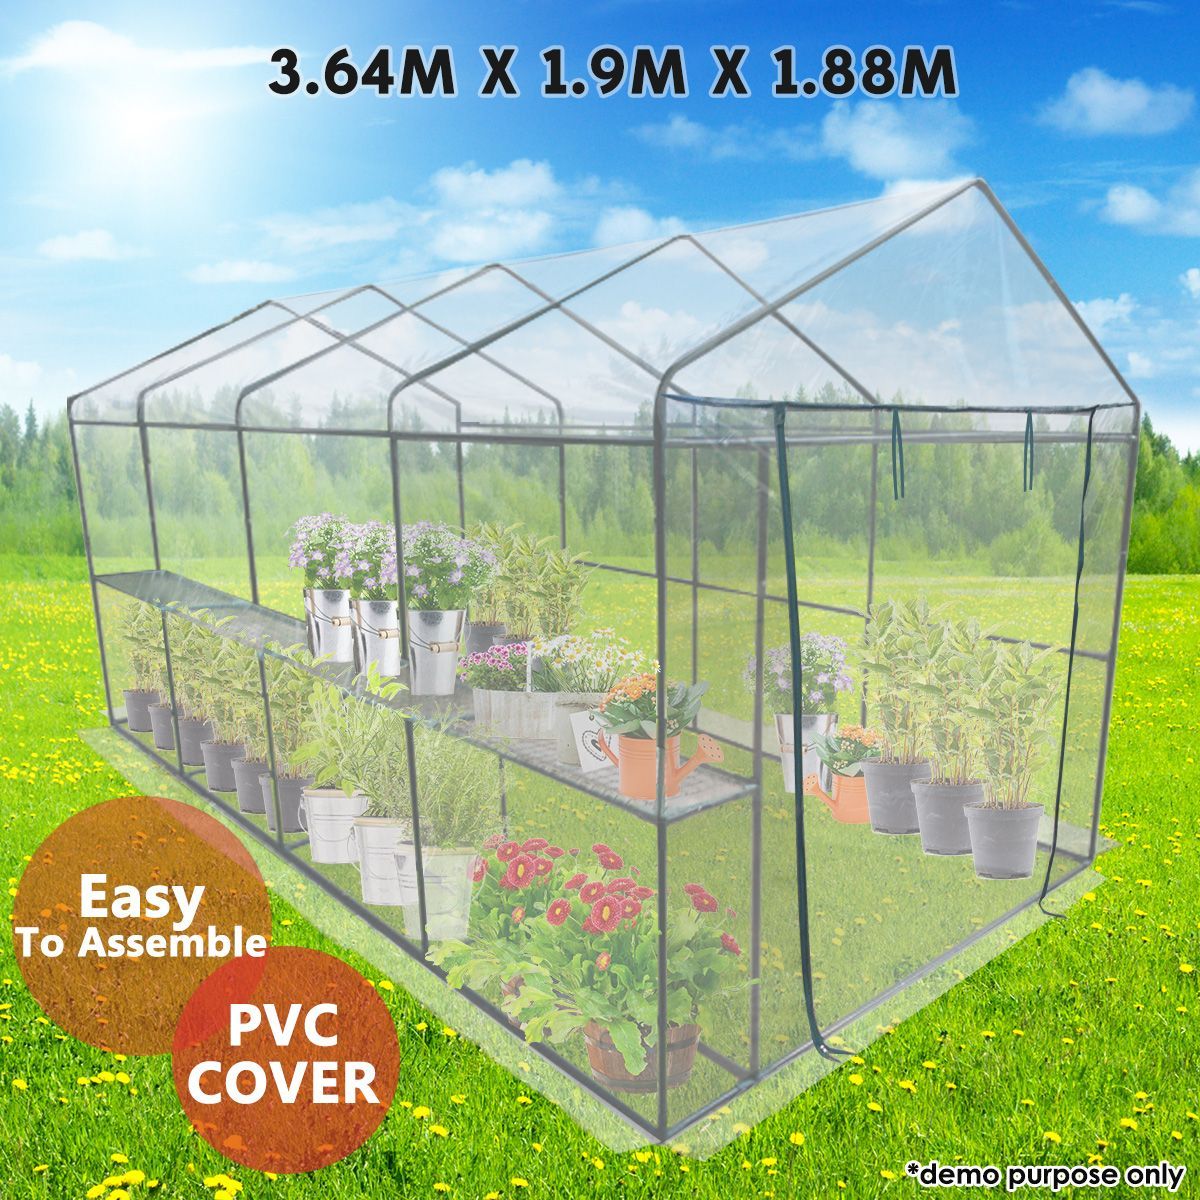 Extra Large Walk-In Garden Greenhouse Shed with PVC Cover and Storage ...